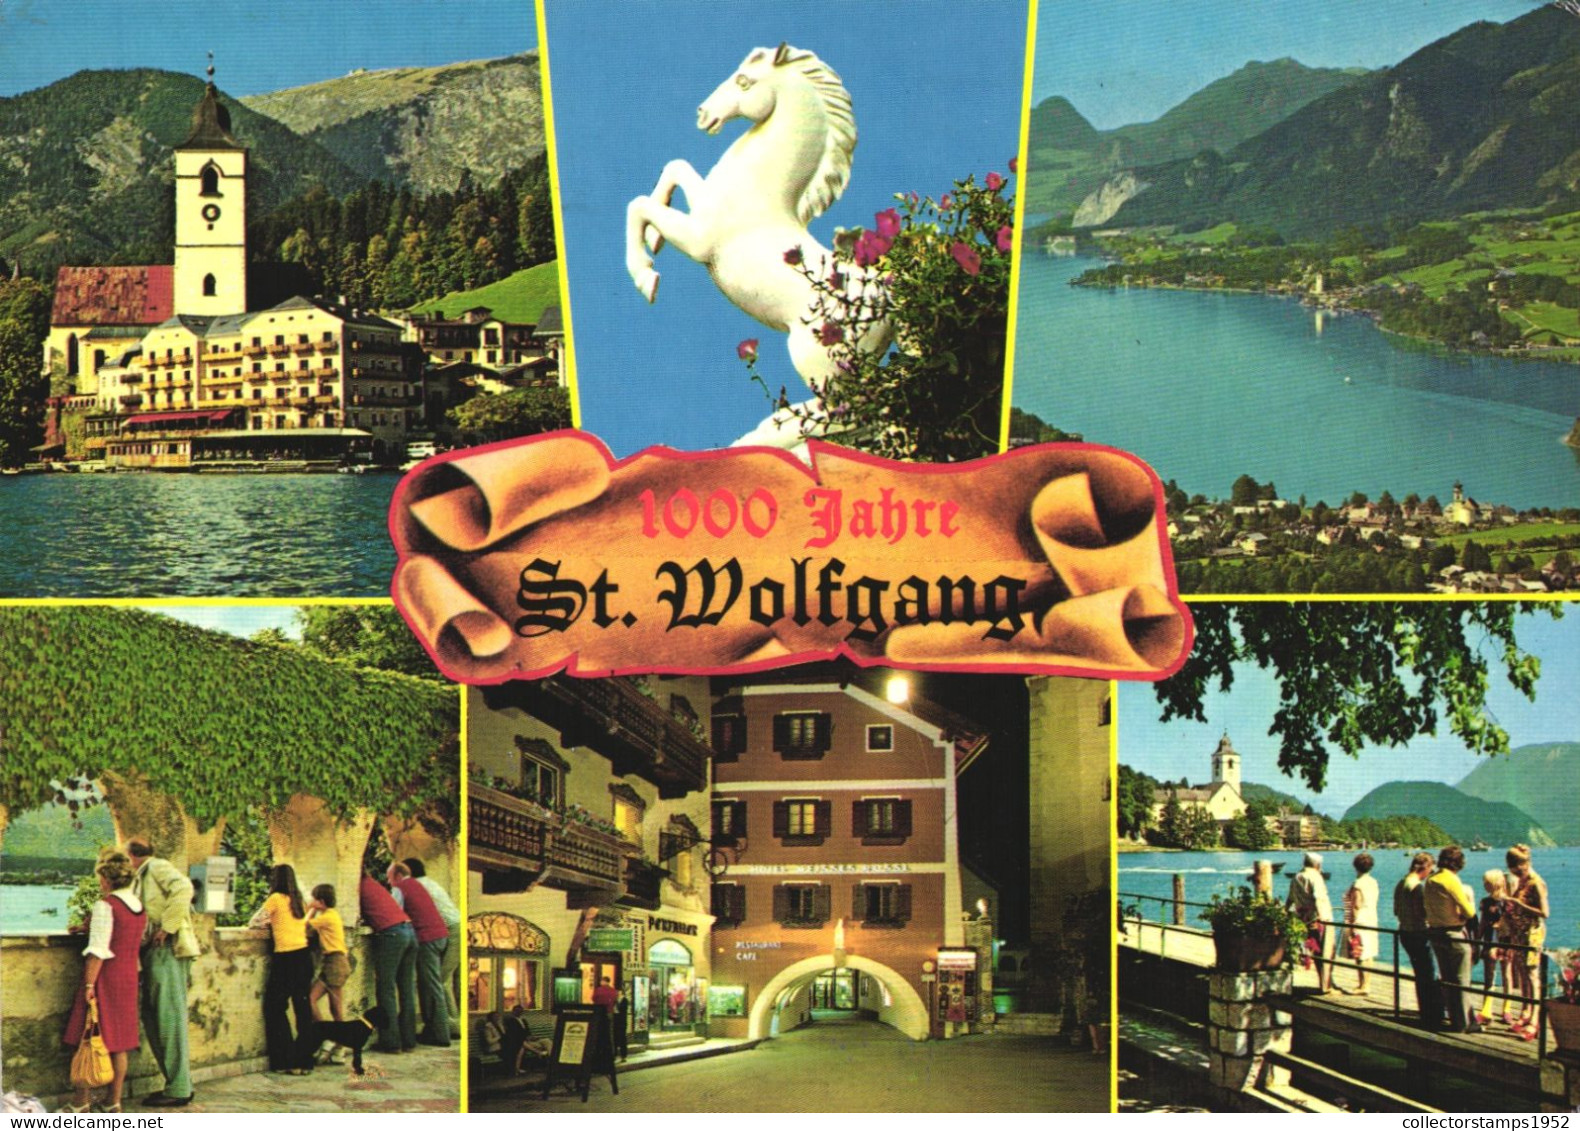 ST. WOLFGANG, MULTIPLE VIEWS, ARCHITECTURE, CHURCH, TOWER WITH CLOCK, HORSE, STATUE, DOG, AUSTRIA, POSTCARD - St. Wolfgang